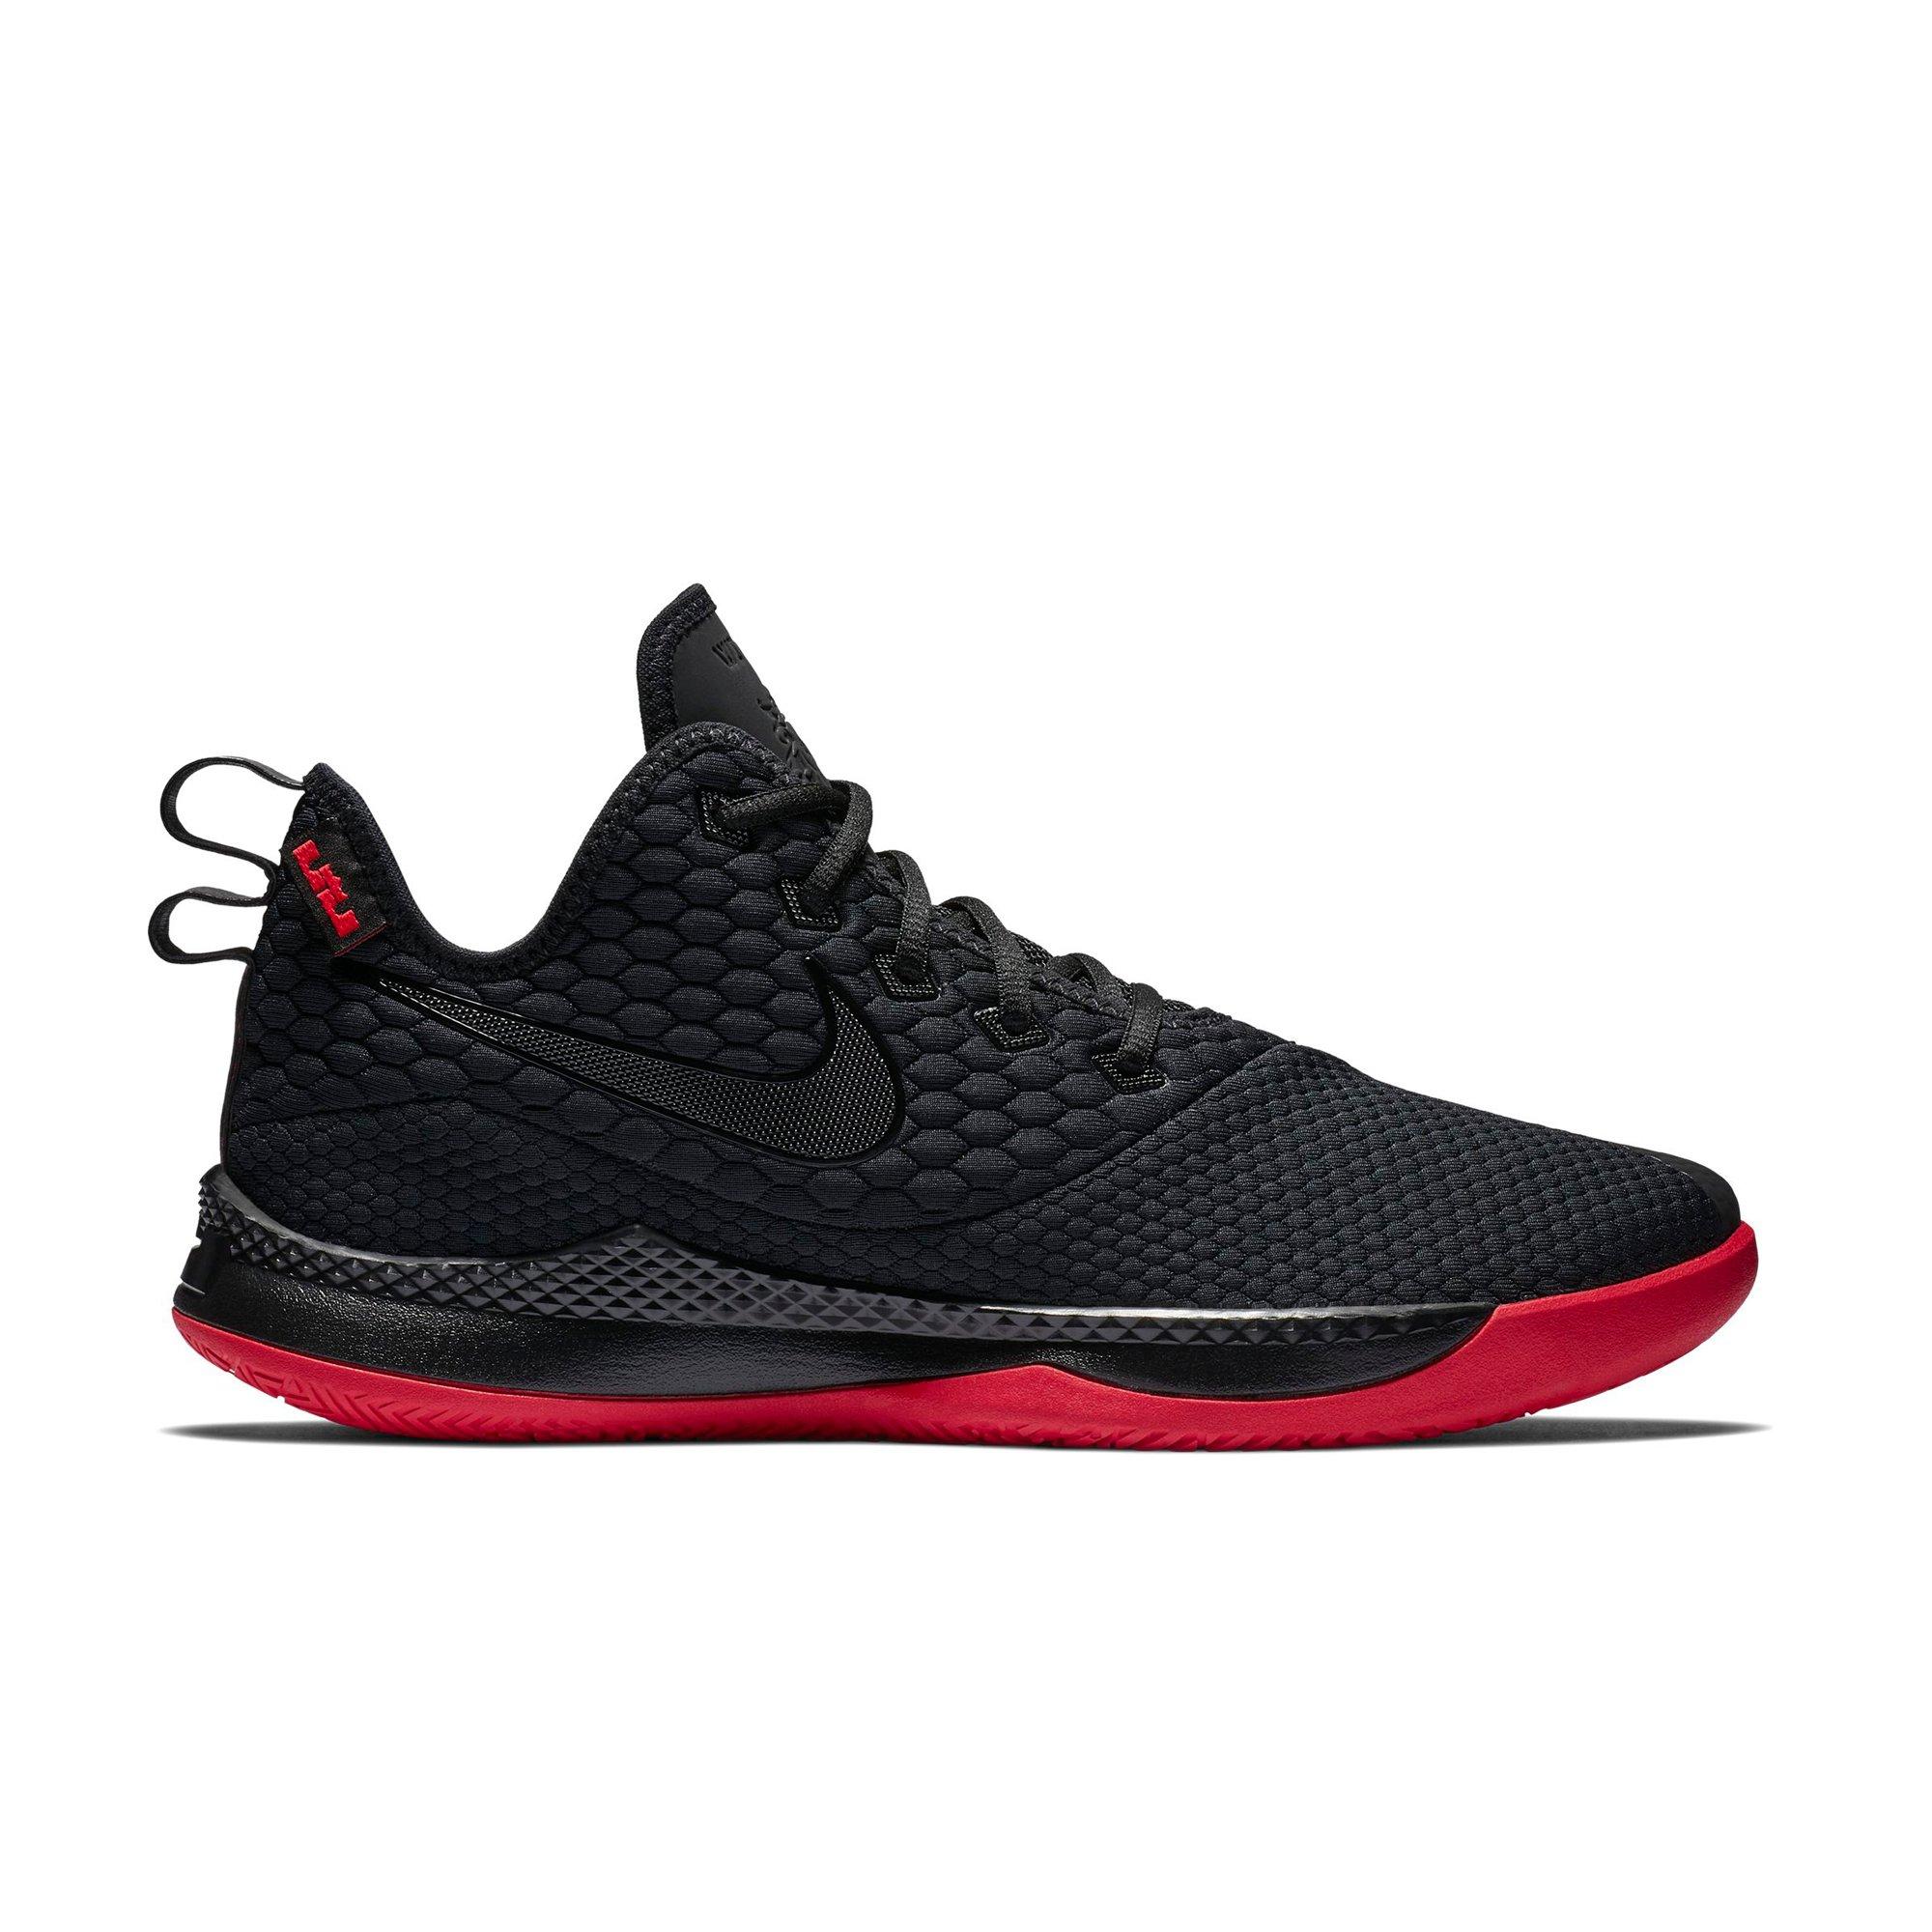 red and black lebron shoes